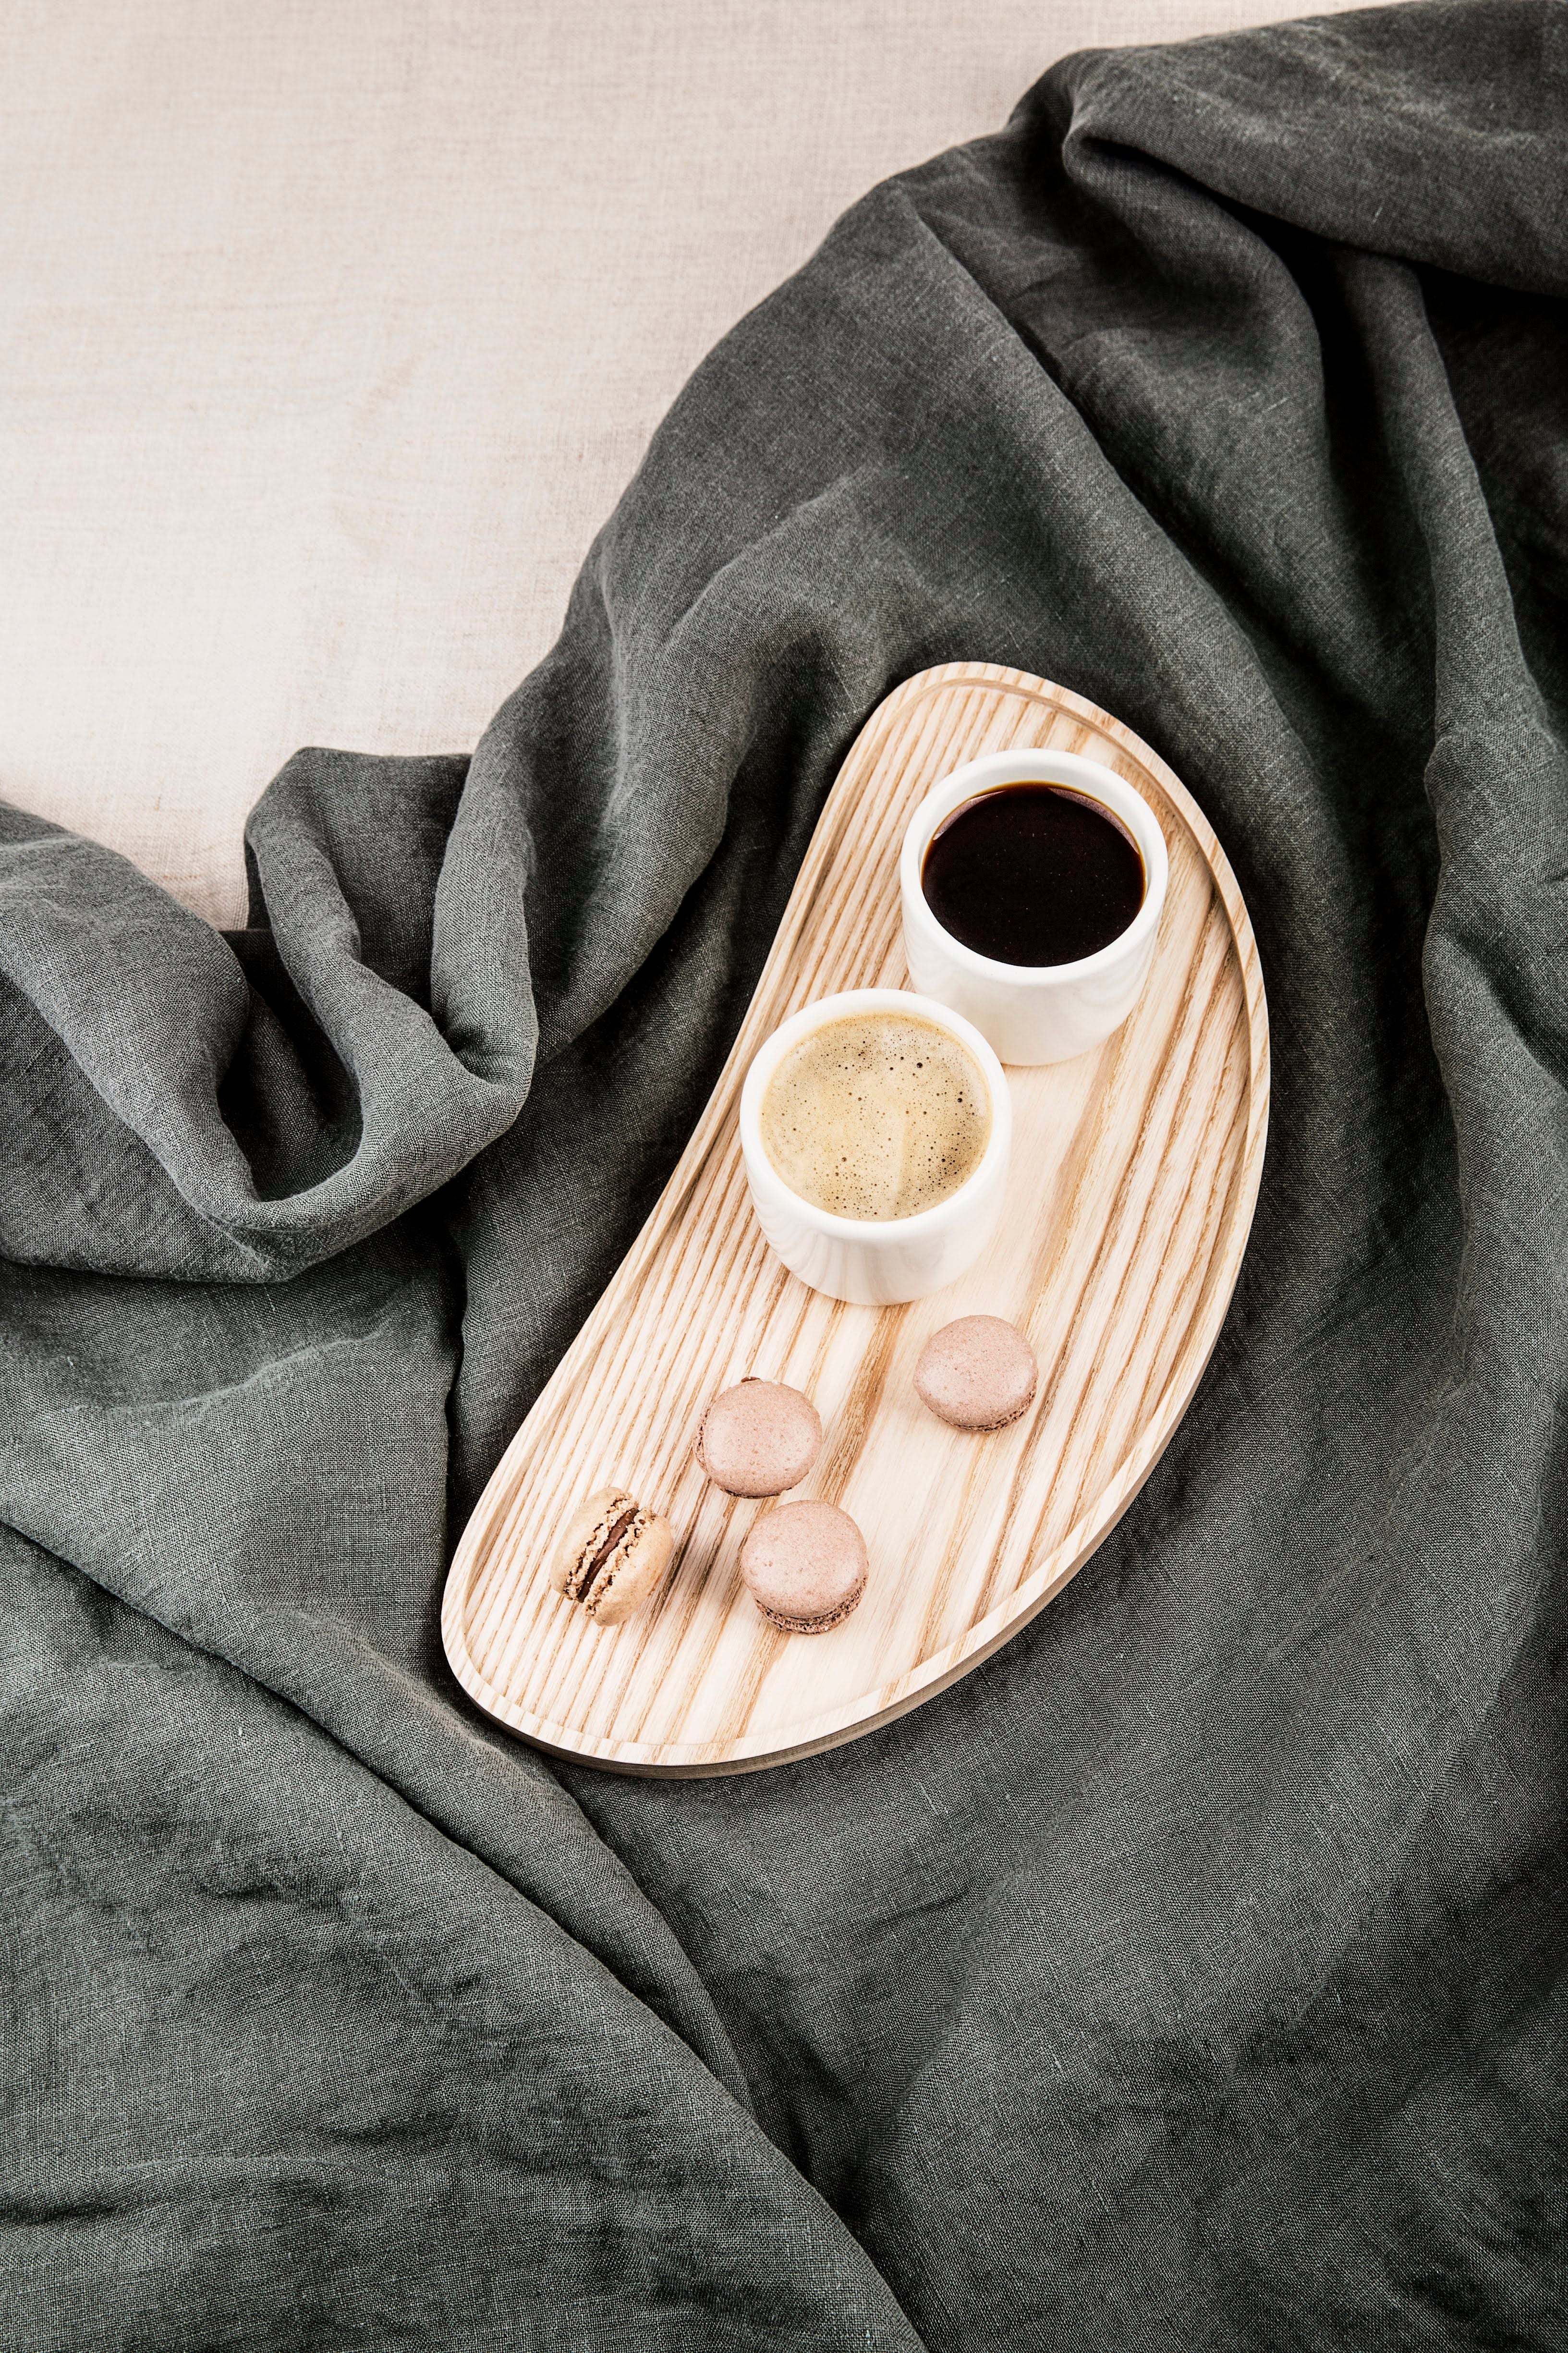 Aesthetic Wooden Serving Tray